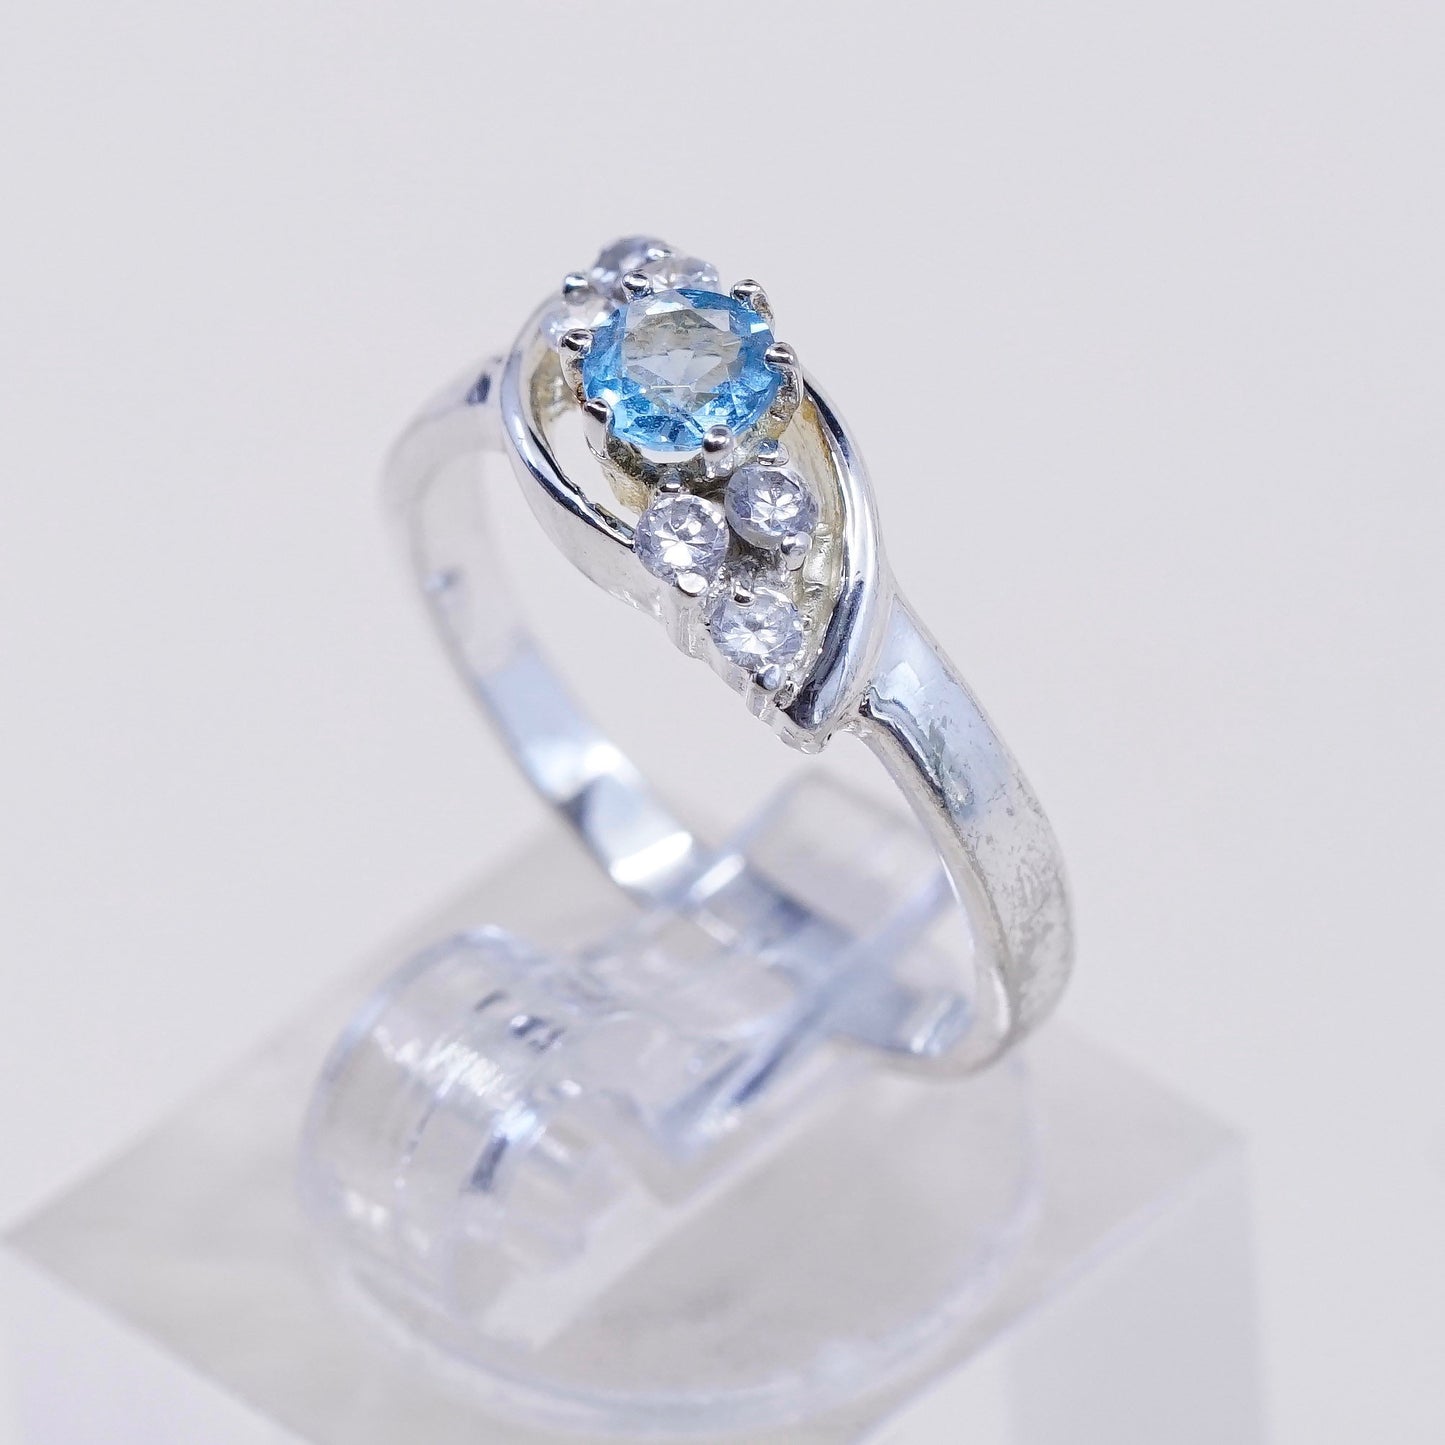 Size 6, vintage sterling silver handmade ring, 925 with blue topaz